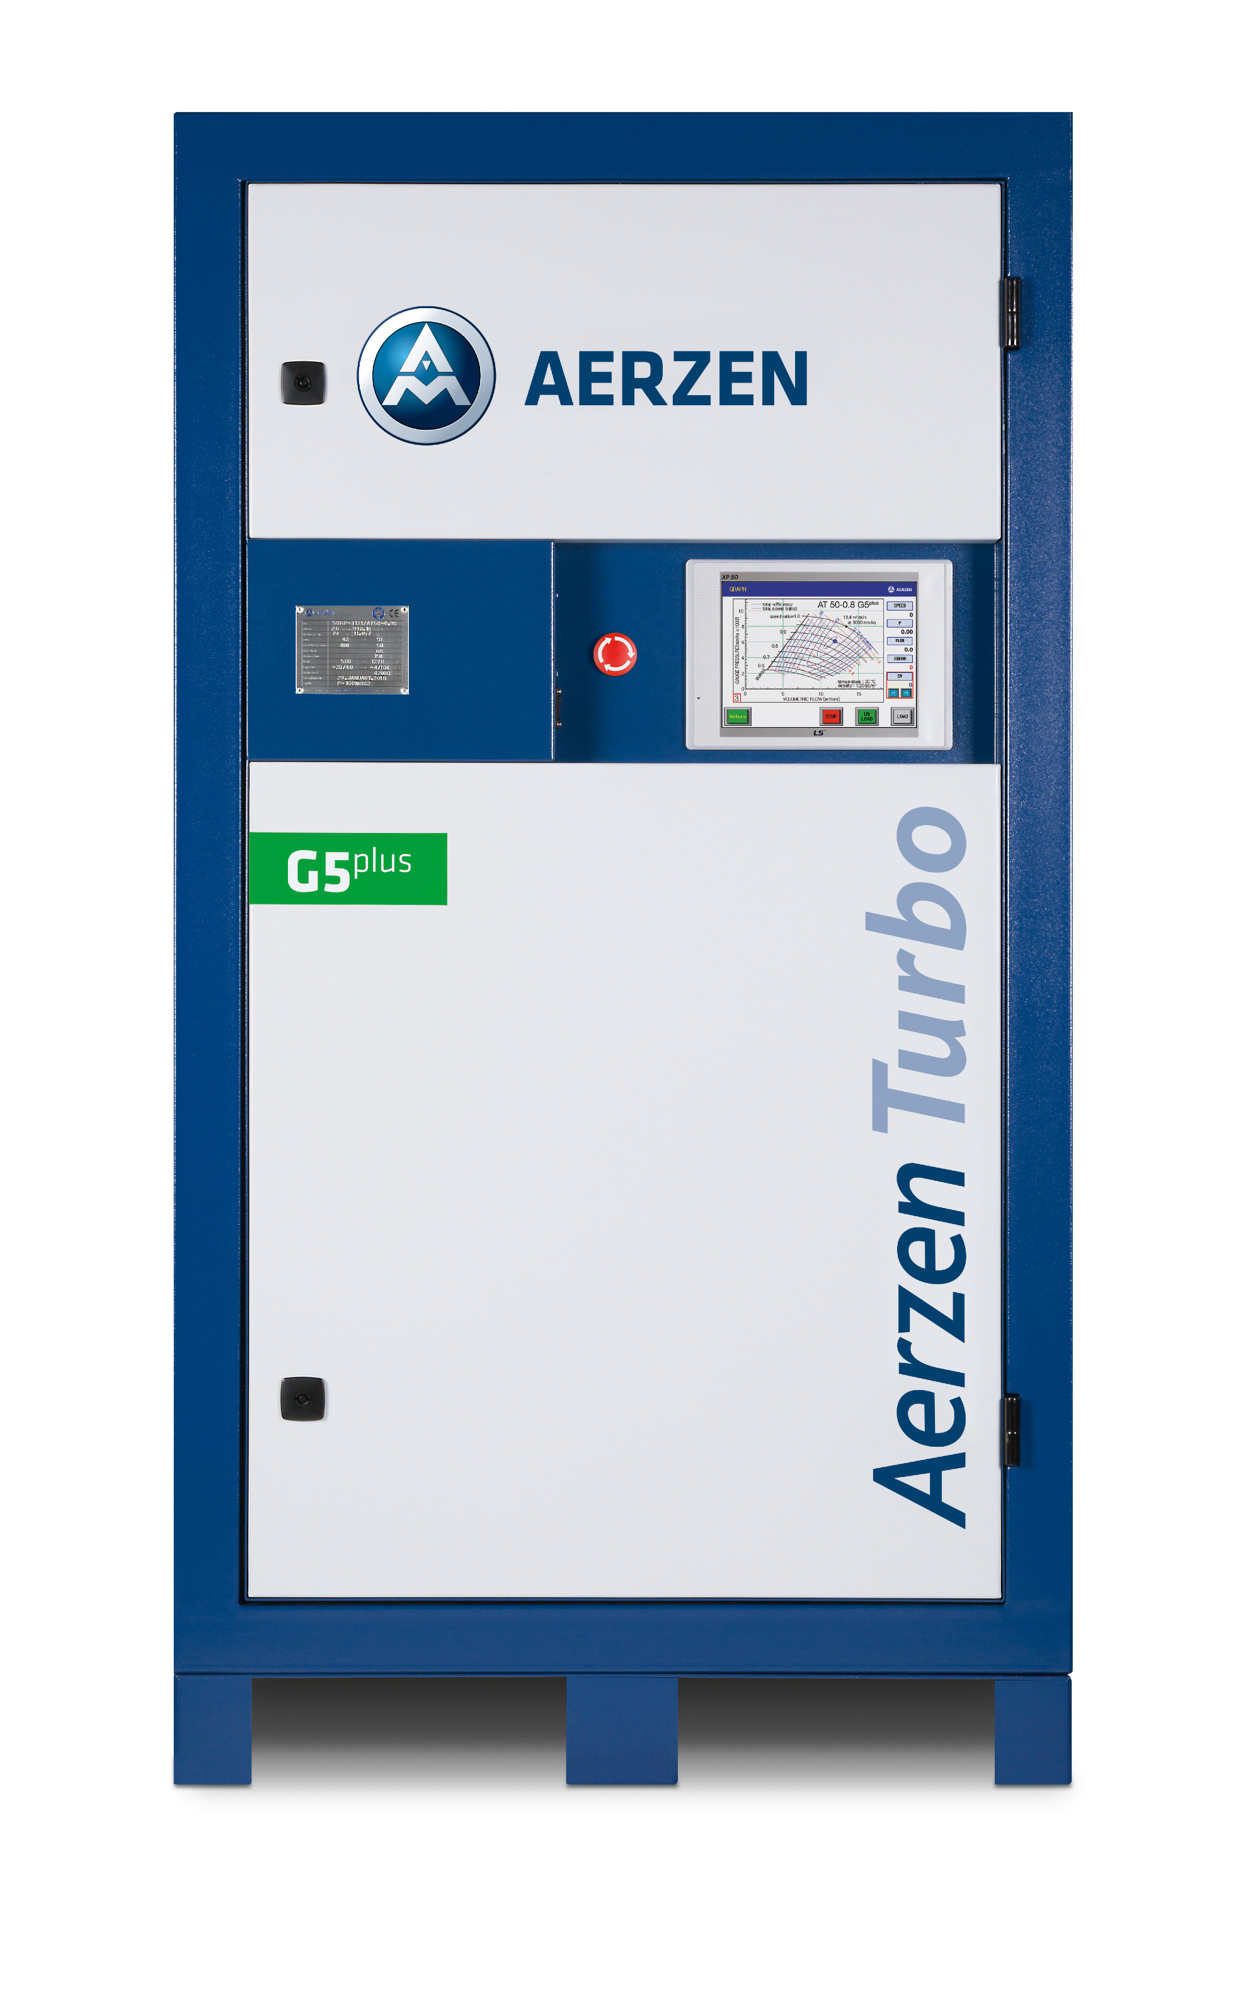 The New Design of the G5plus Turbo From Aerzen